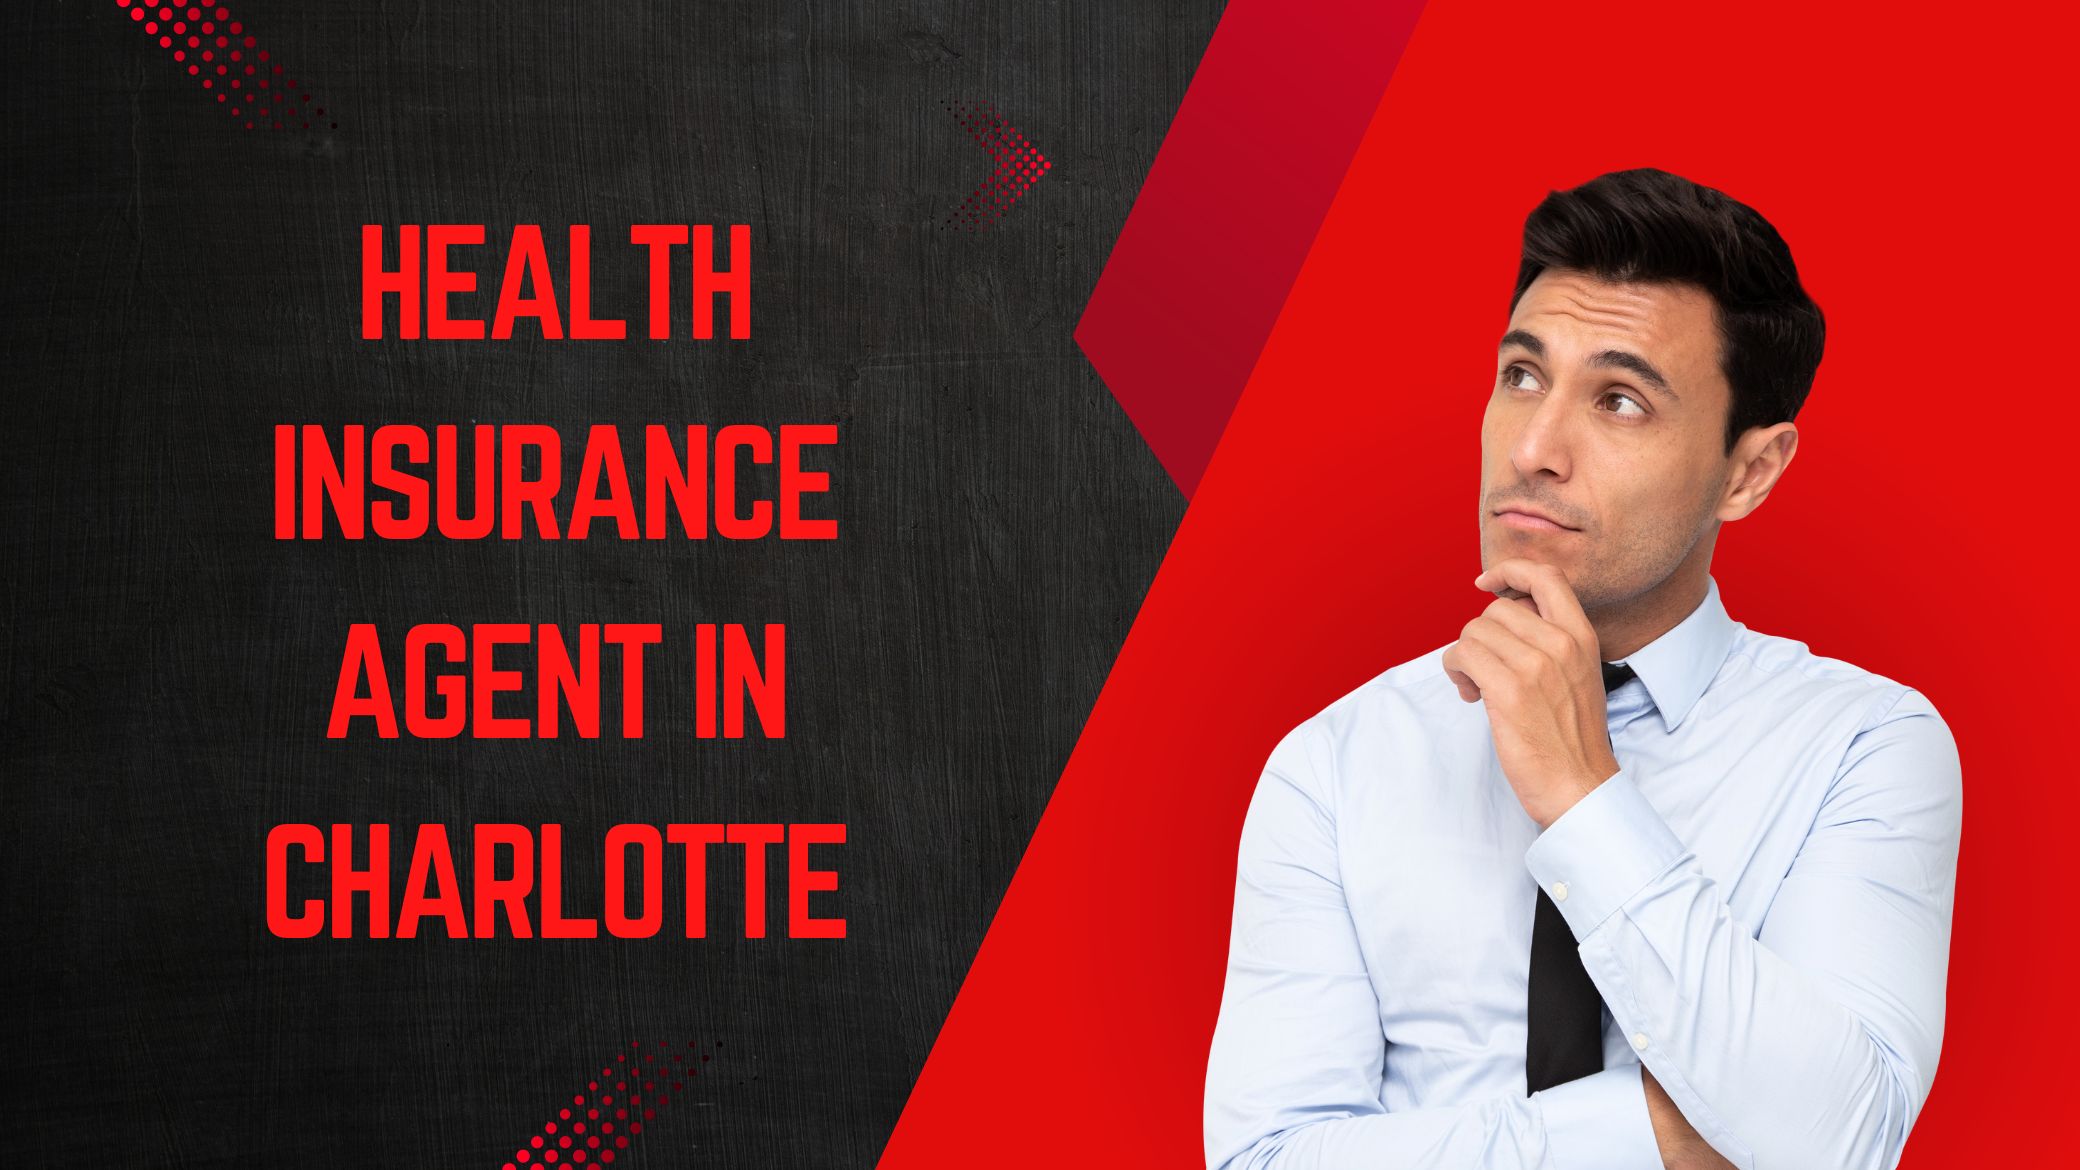 Health Insurance Agent in Charlotte